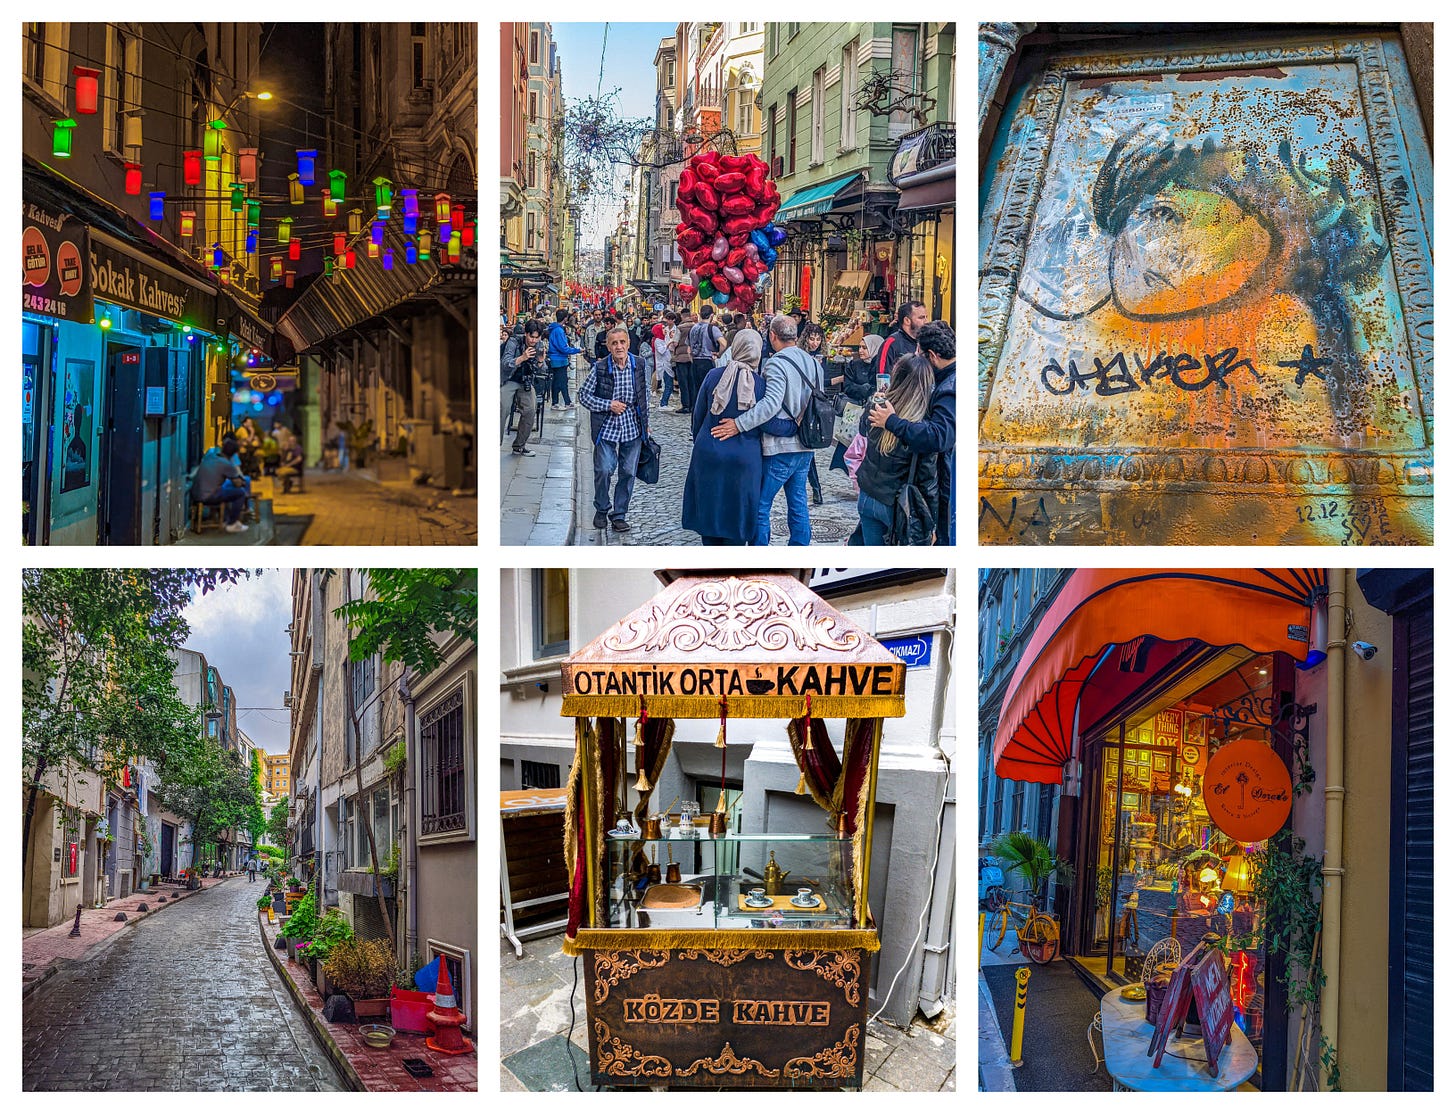 Collage showing a cafe at night lit up by colorful lamps, a couple posing for a picture as a man carrying red balloons passes behind, some street art, a cobblestoned street, a cart selling traditional Turkish coffee, and a boutique antique shop